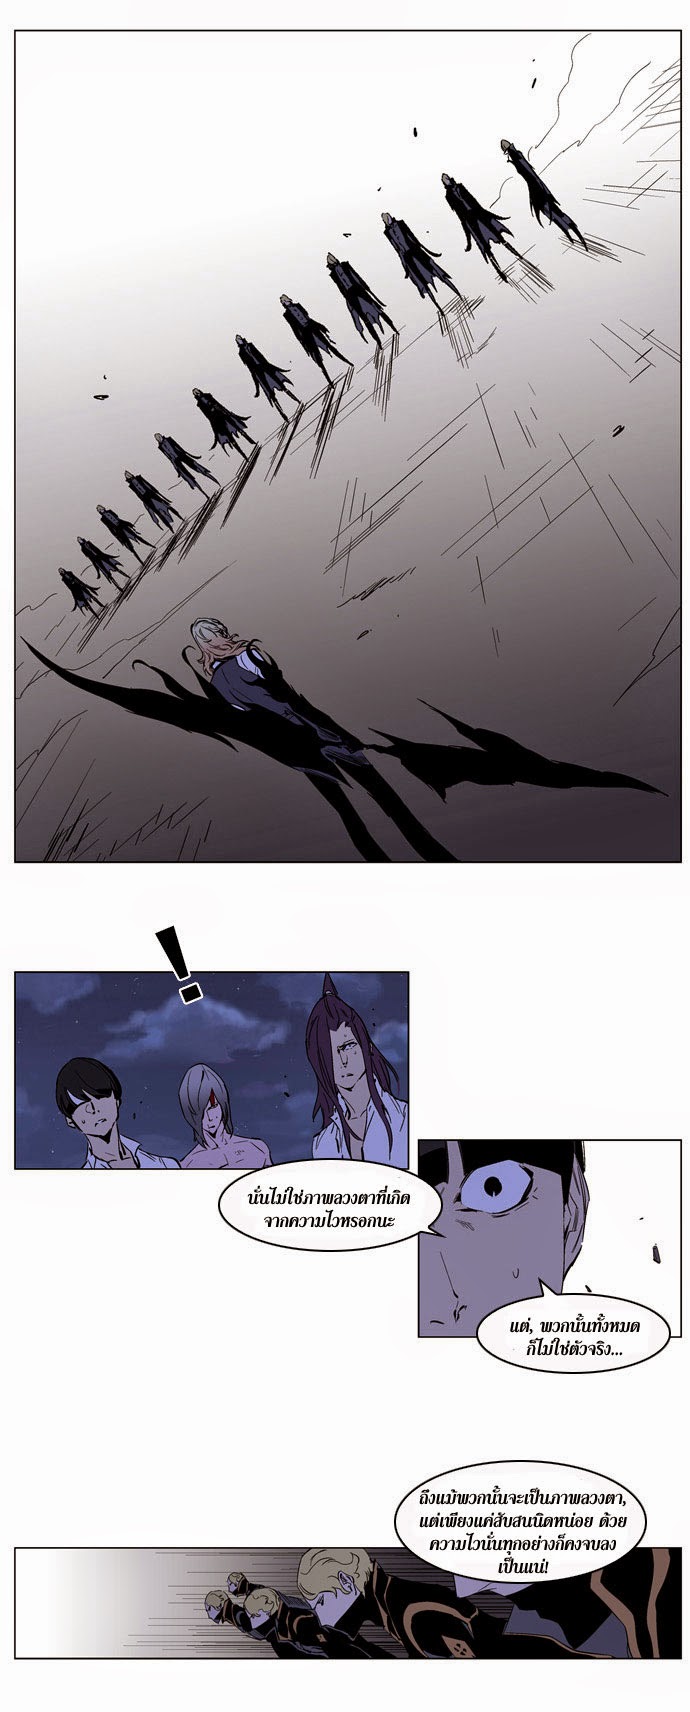 Noblesse 189 013